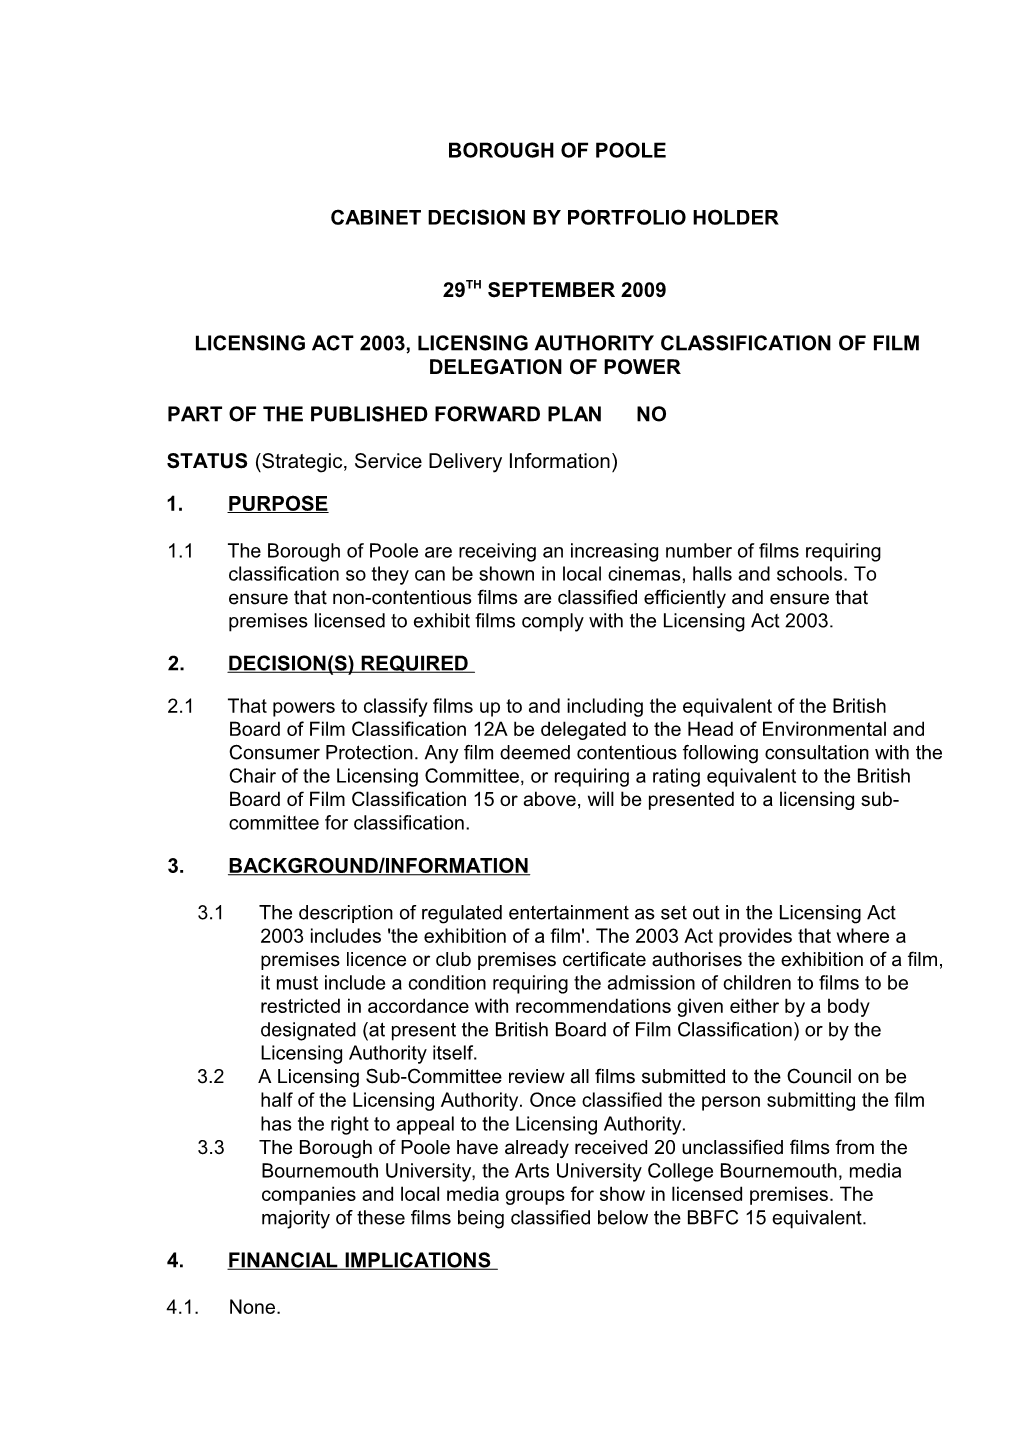 Licensing Act 2003, Licensing Authority Classification of Film Delegation of Power